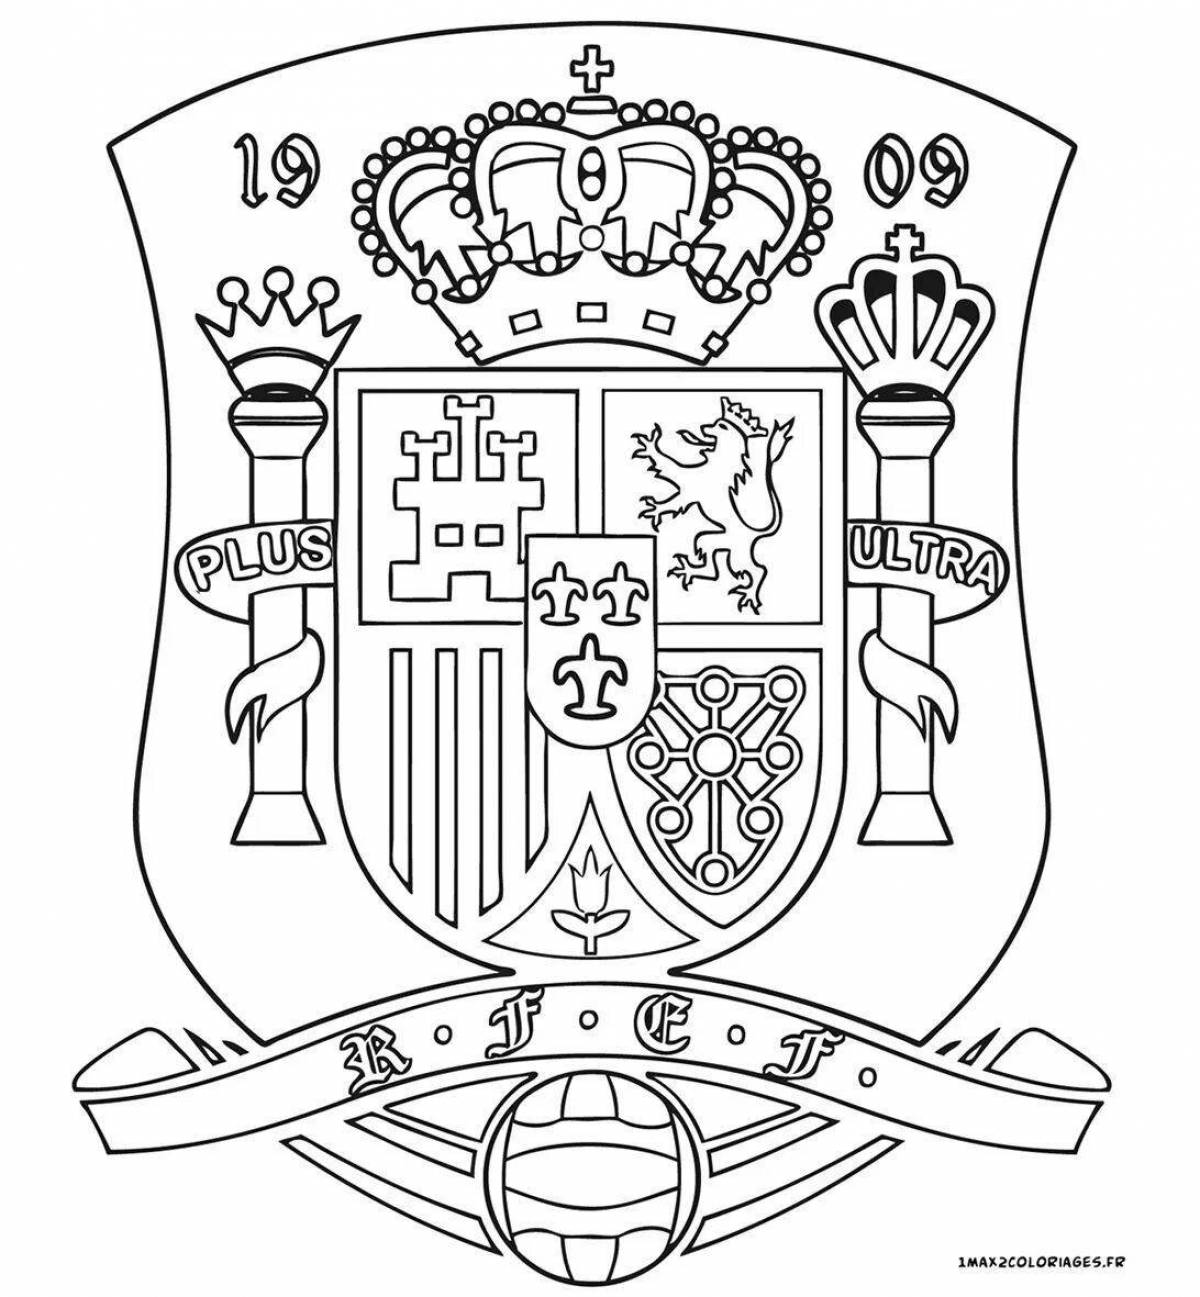 Majestic coloring pages with coats of arms of the countries of the world